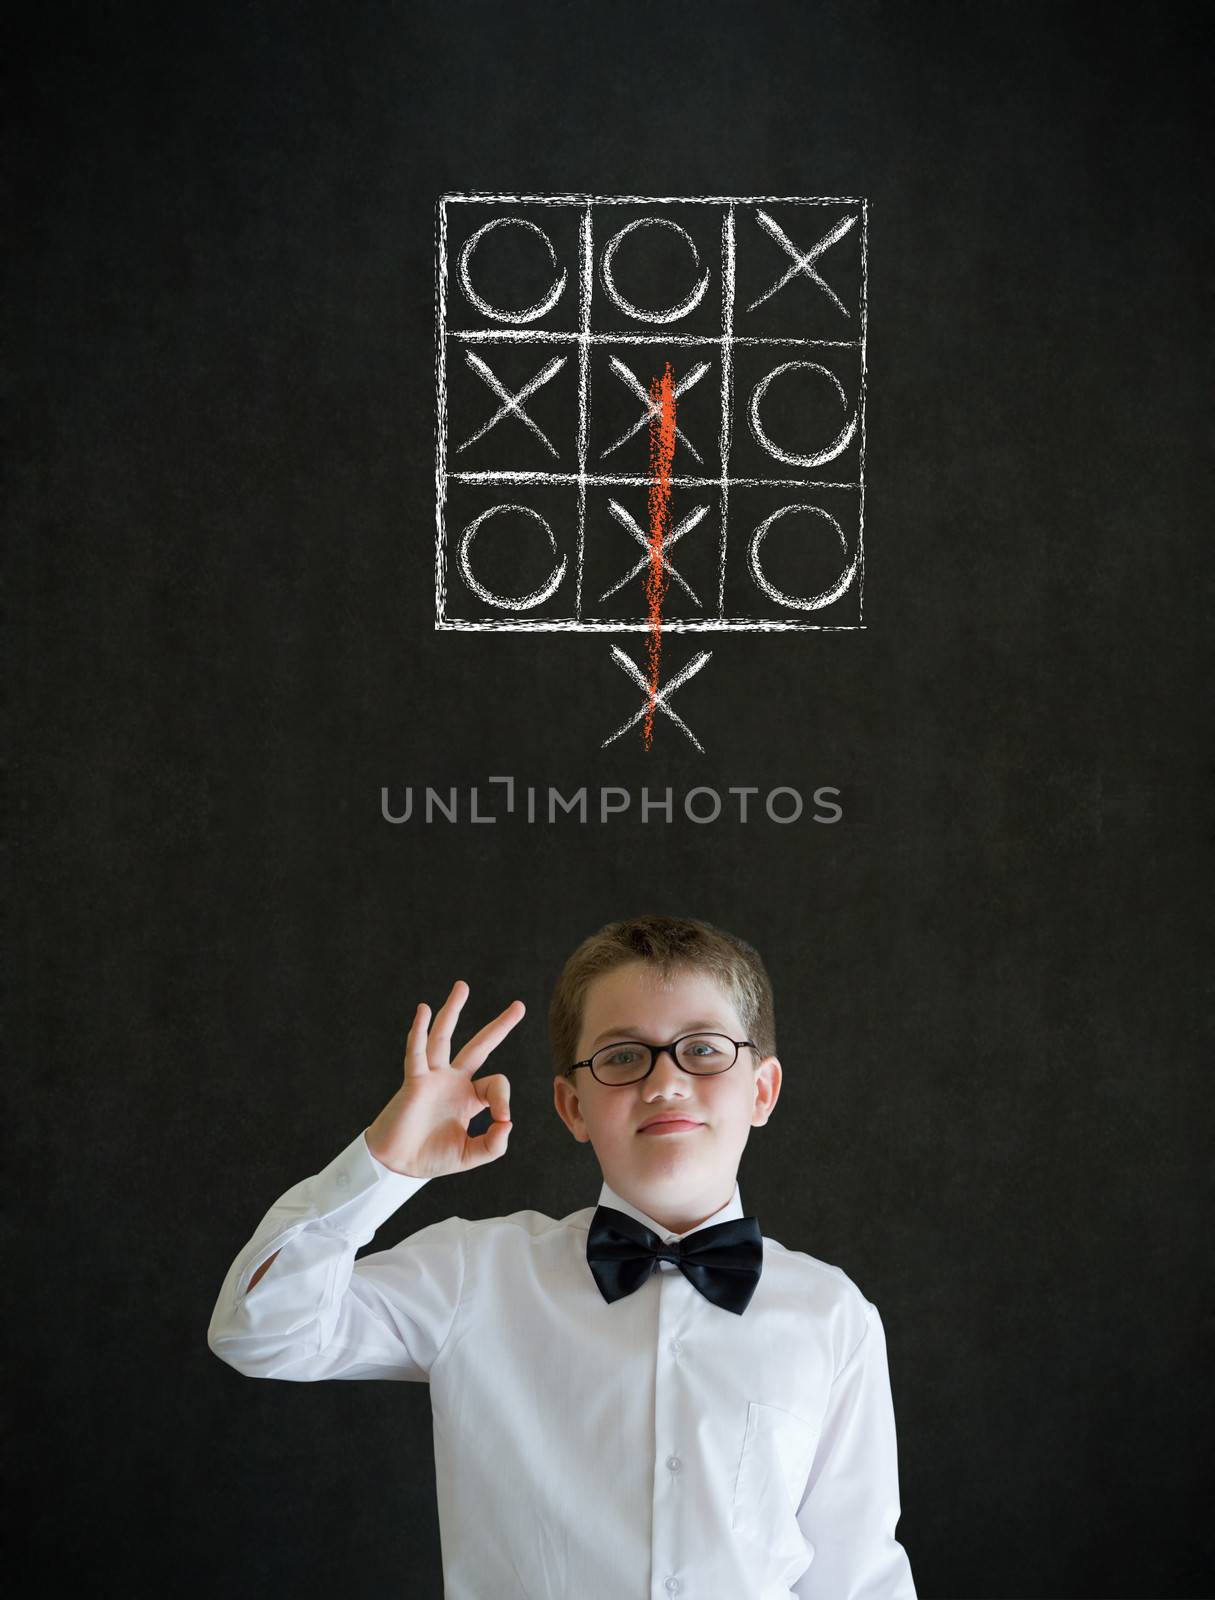 All ok boy business man with thinking out of the box tic tac toe concept by alistaircotton